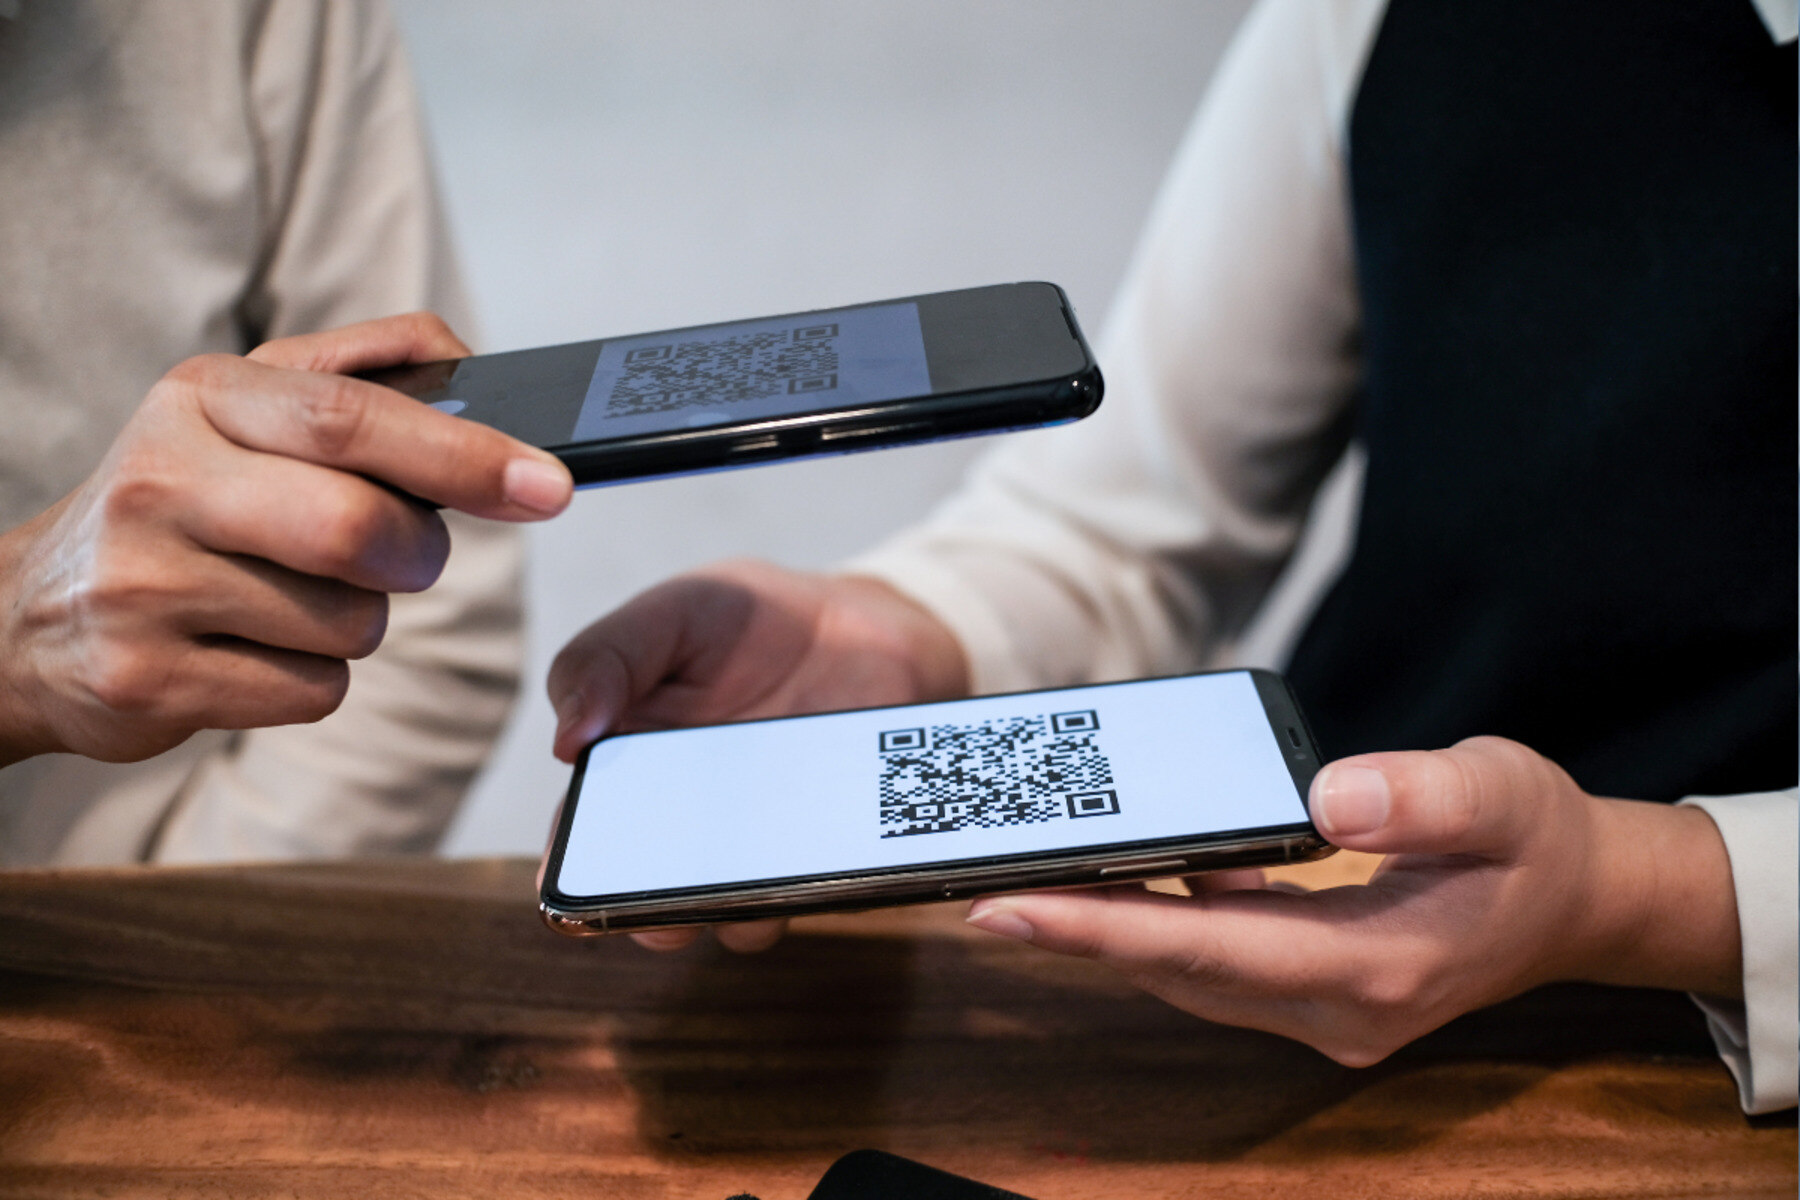 Scanning QR Codes On OnePlus Nord – Quick Guide